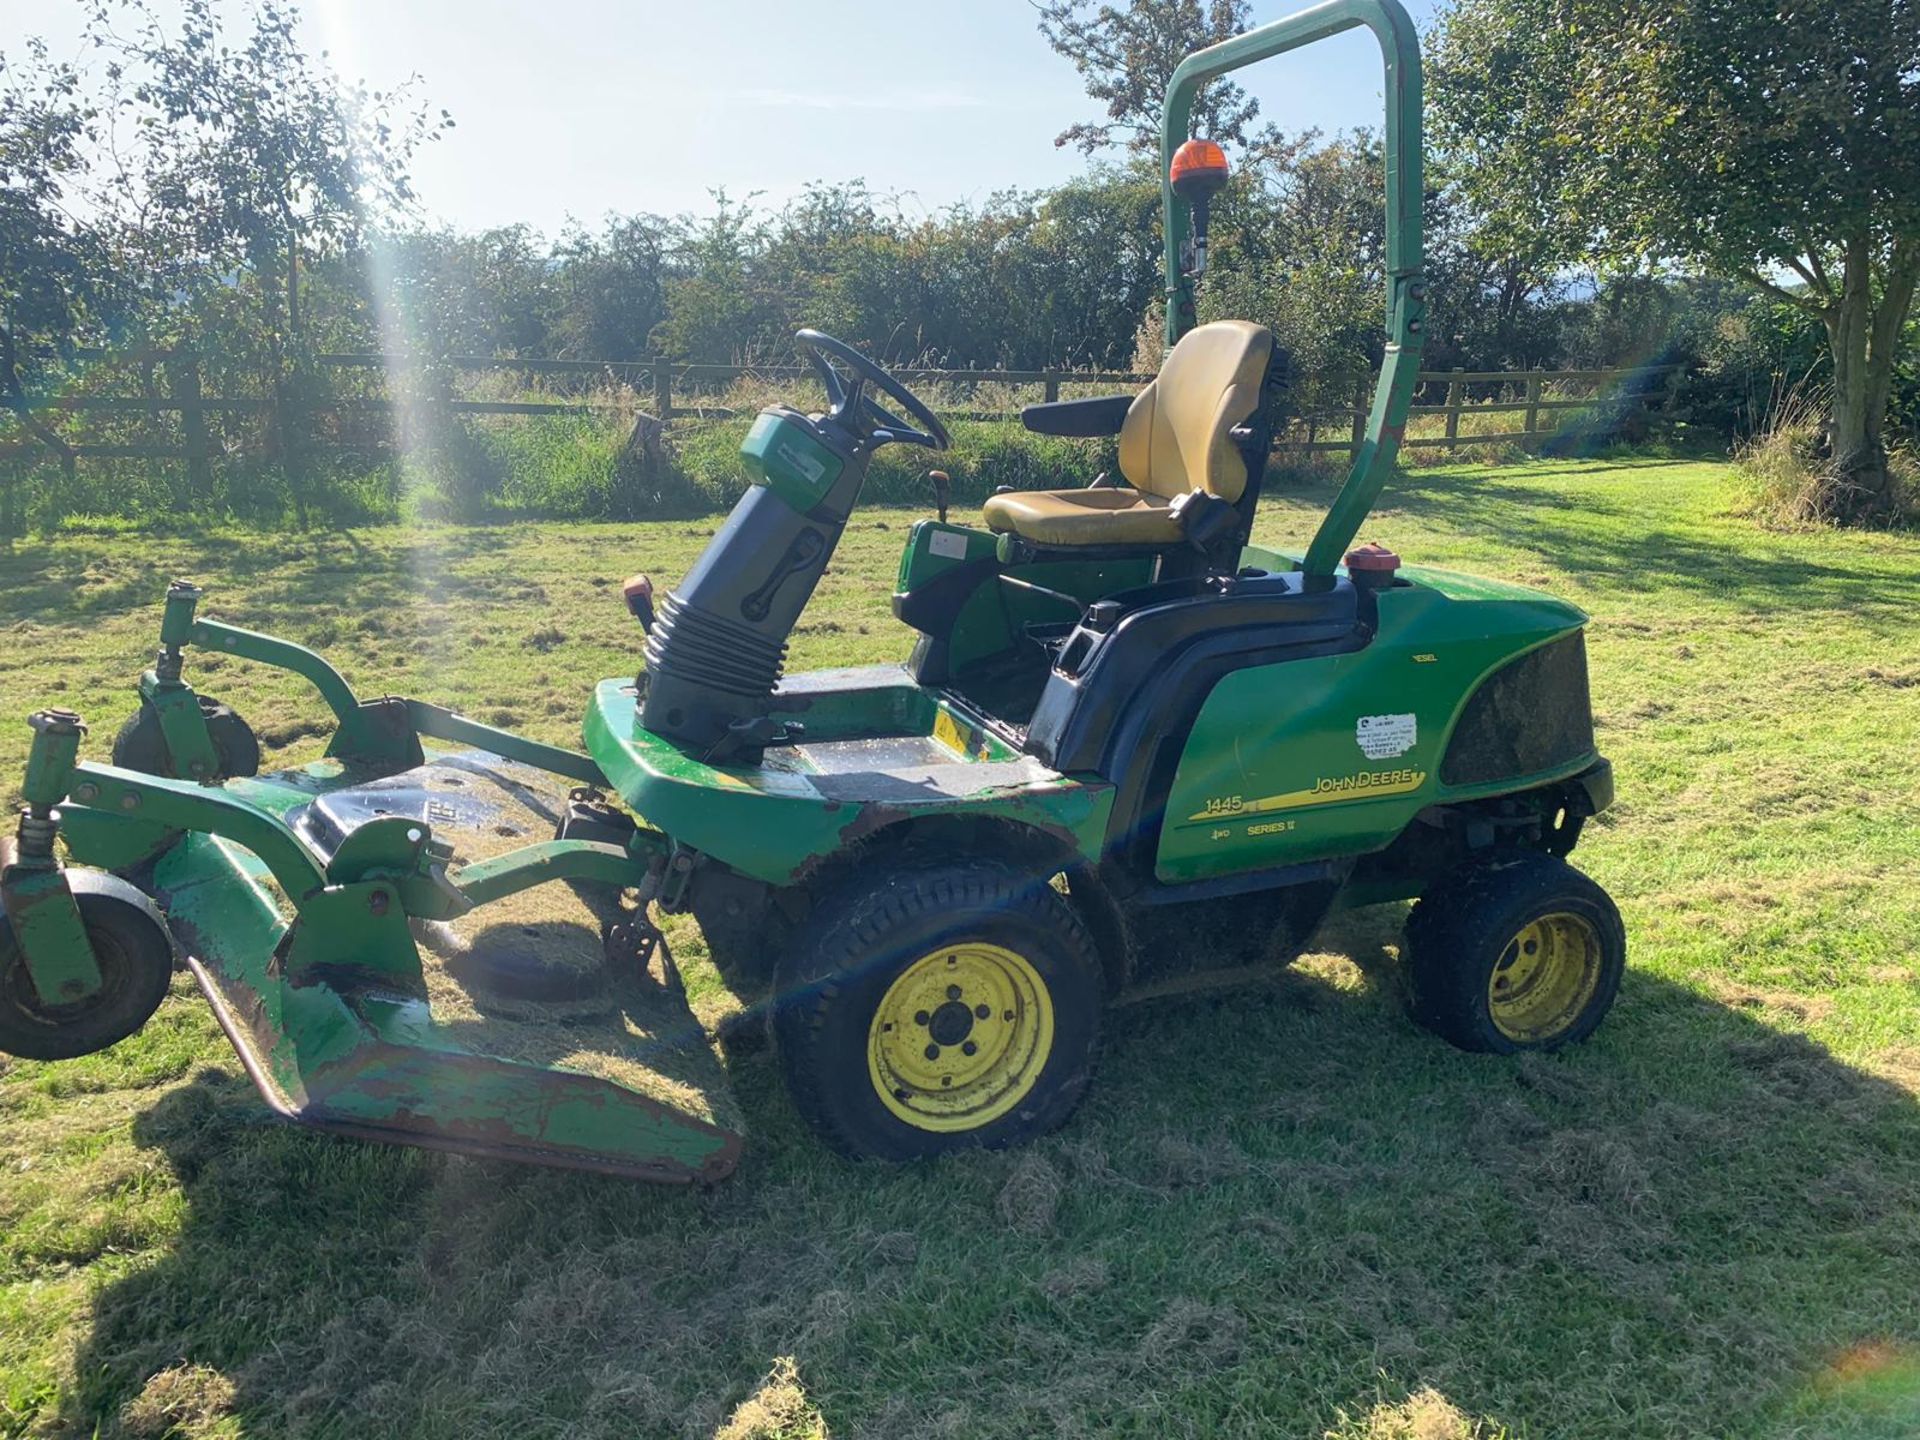 JOHN DEERE 1445 SERIES II 4WD RIDE ON DIESEL LAWN MOWER C/W OUT-FRONT ROTARY CUTTING DECK *PLUS VAT* - Image 8 of 14